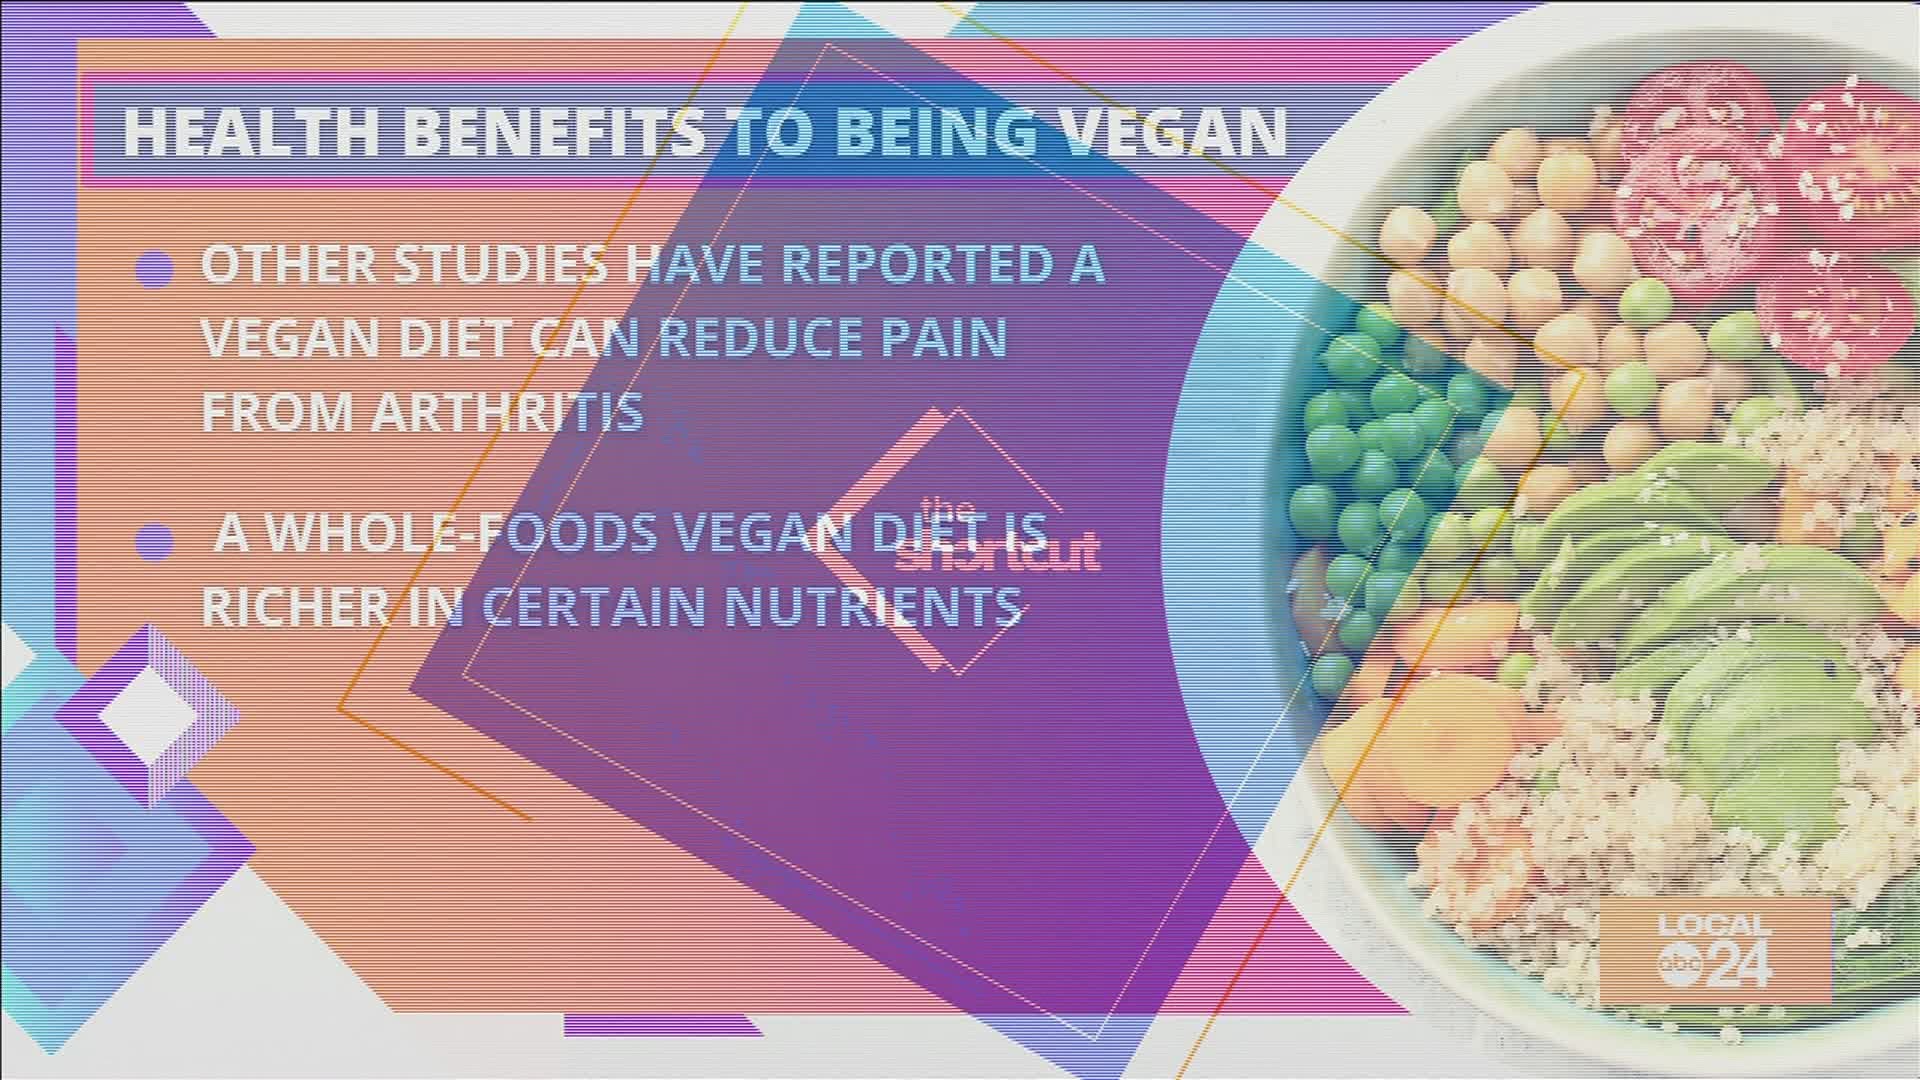 Thinking about going vegan this year? In that case, join Sydney Neely and we learn more about how veganism can improve one's life the right way!